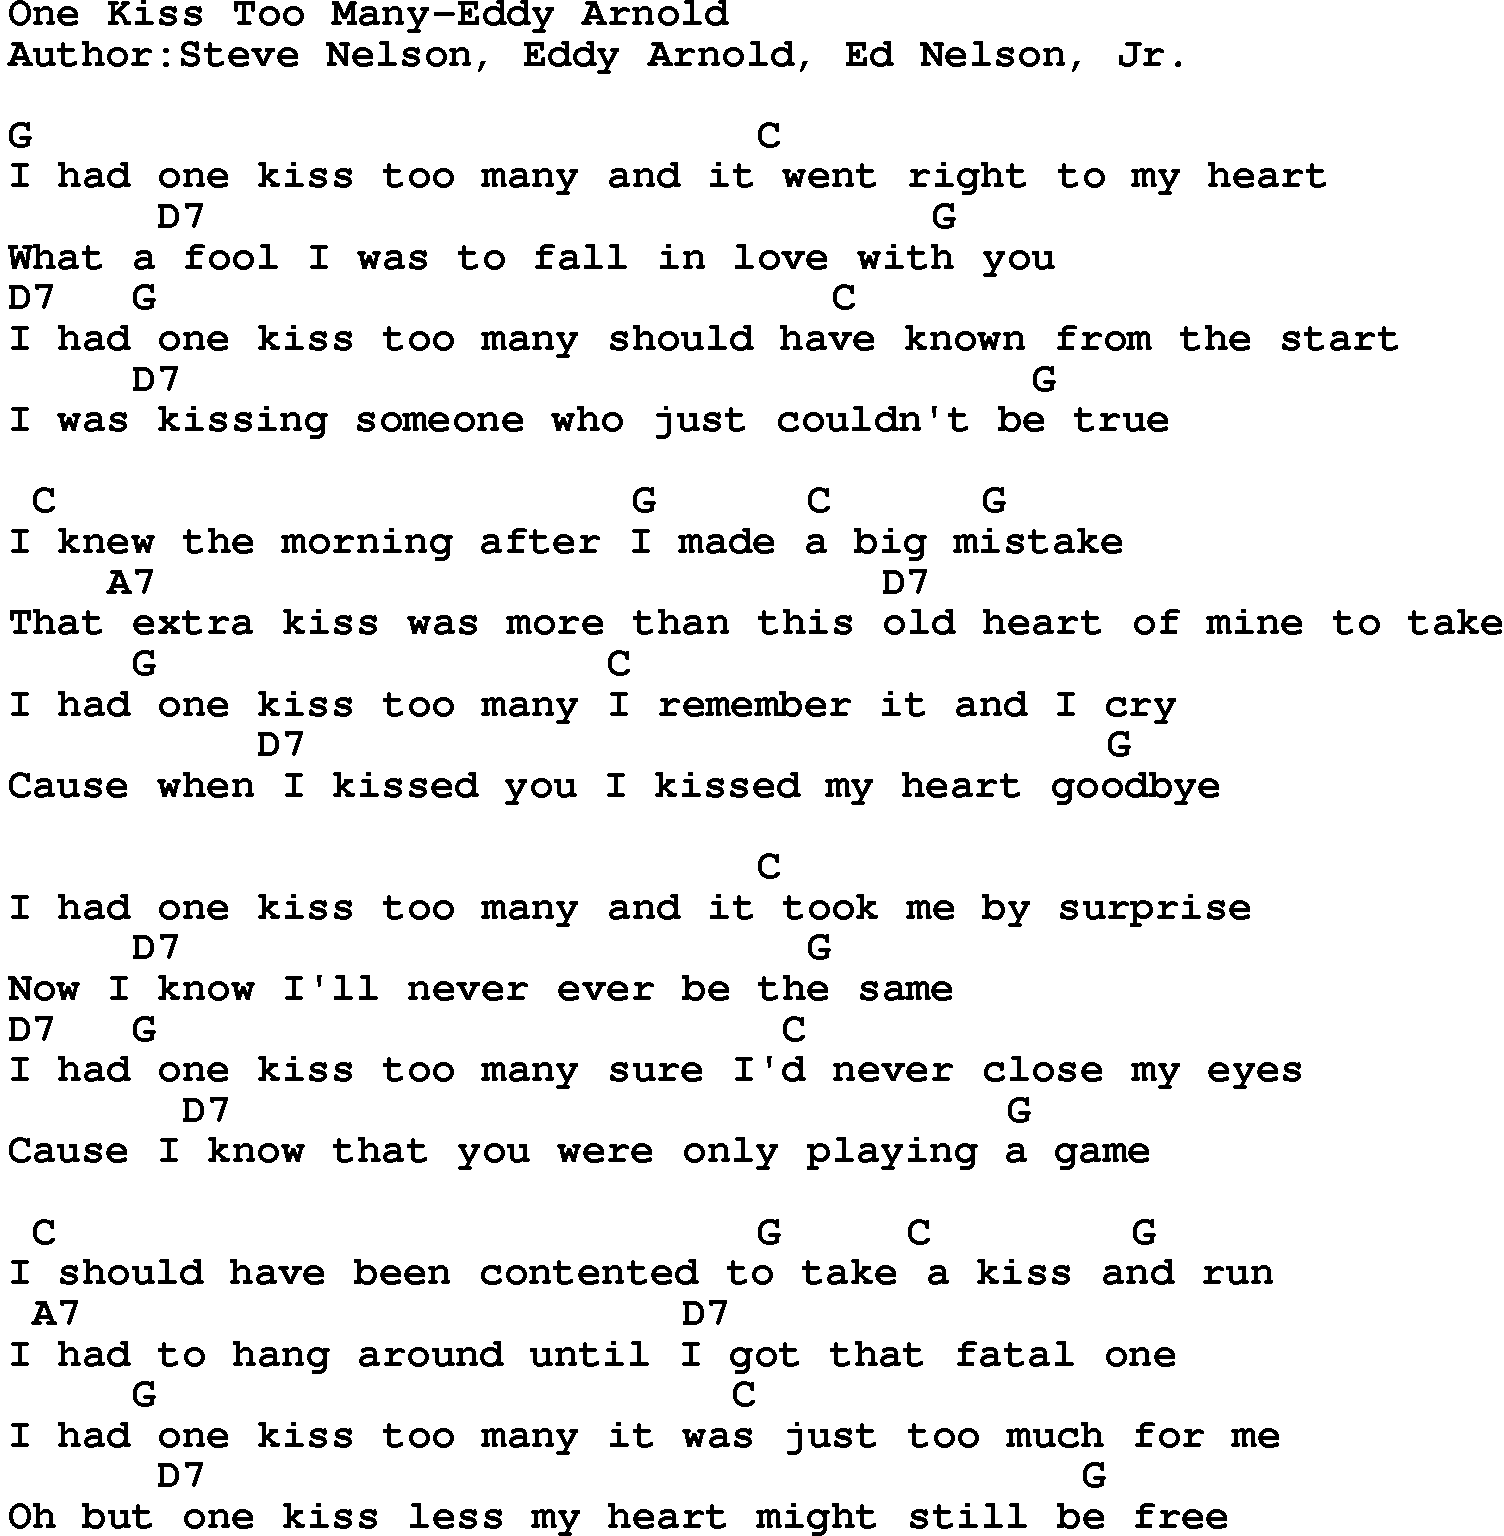 Country music song: One Kiss Too Many-Eddy Arnold lyrics and chords